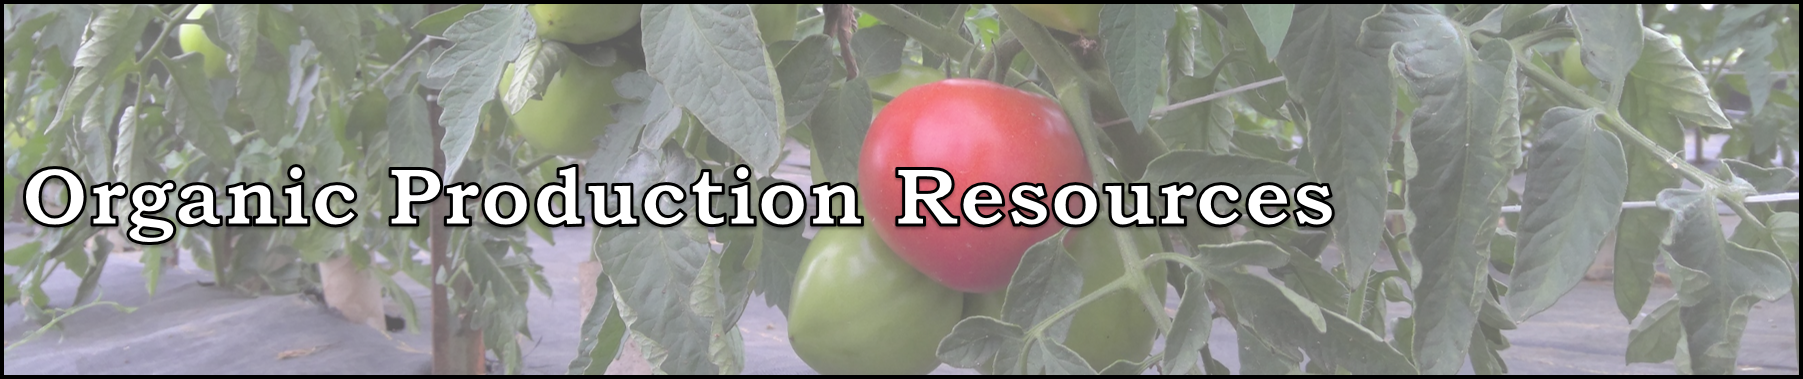 Organic Production Resources